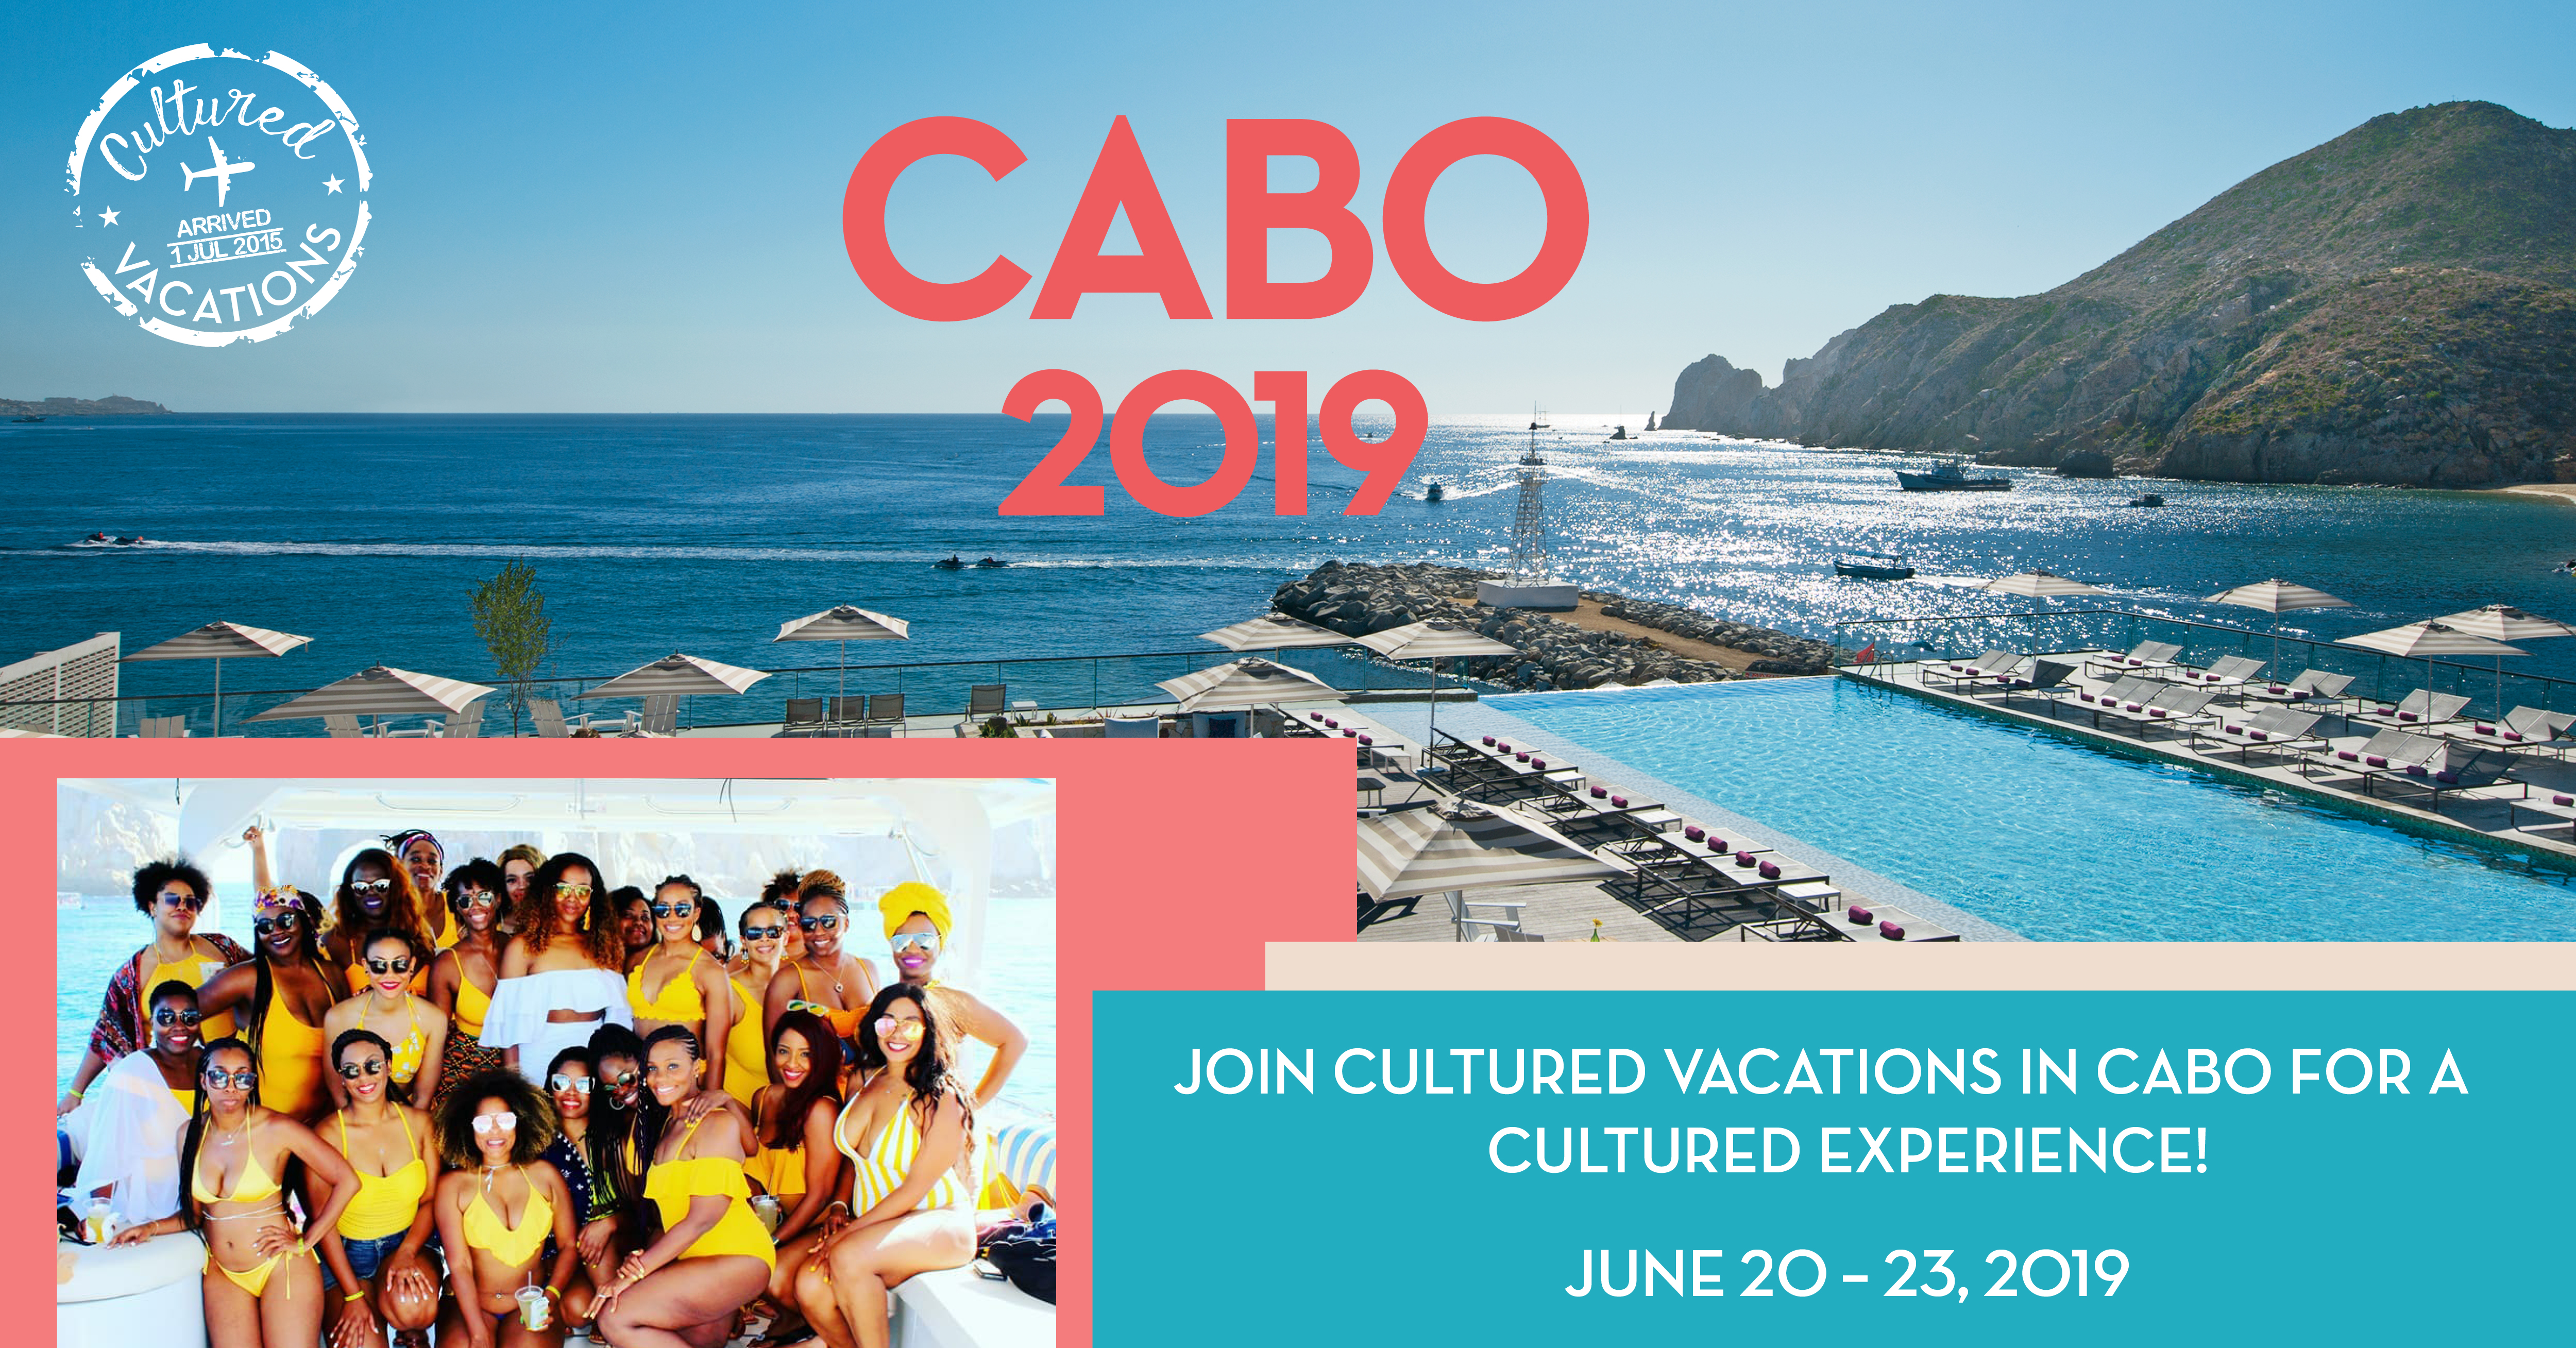 Join Cultured Vacations in Cabo